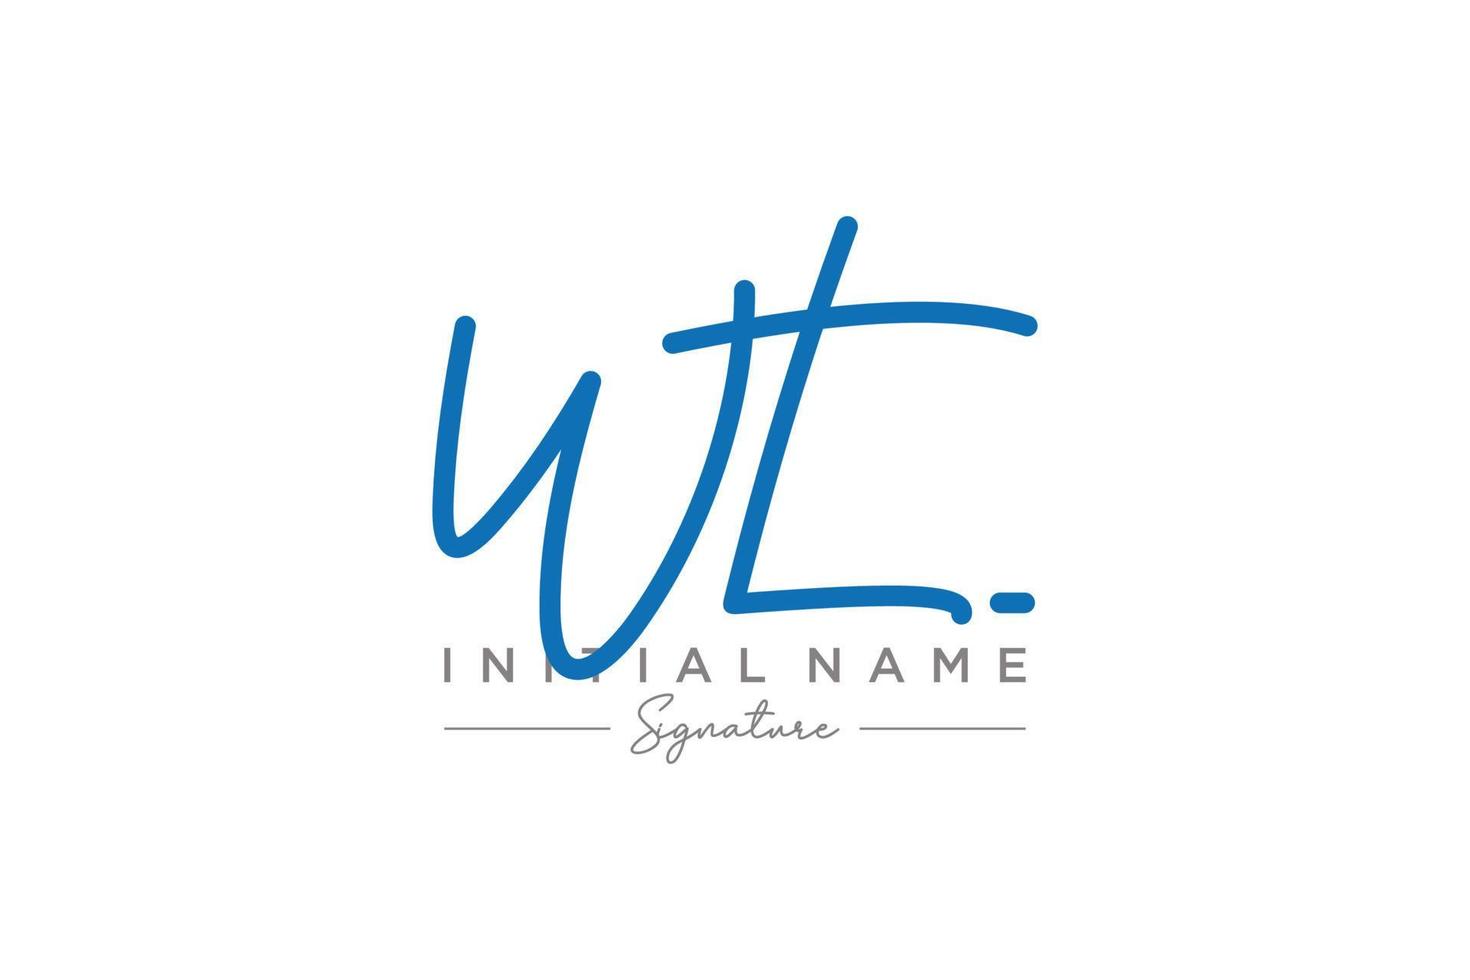 Initial WT signature logo template vector. Hand drawn Calligraphy lettering Vector illustration.